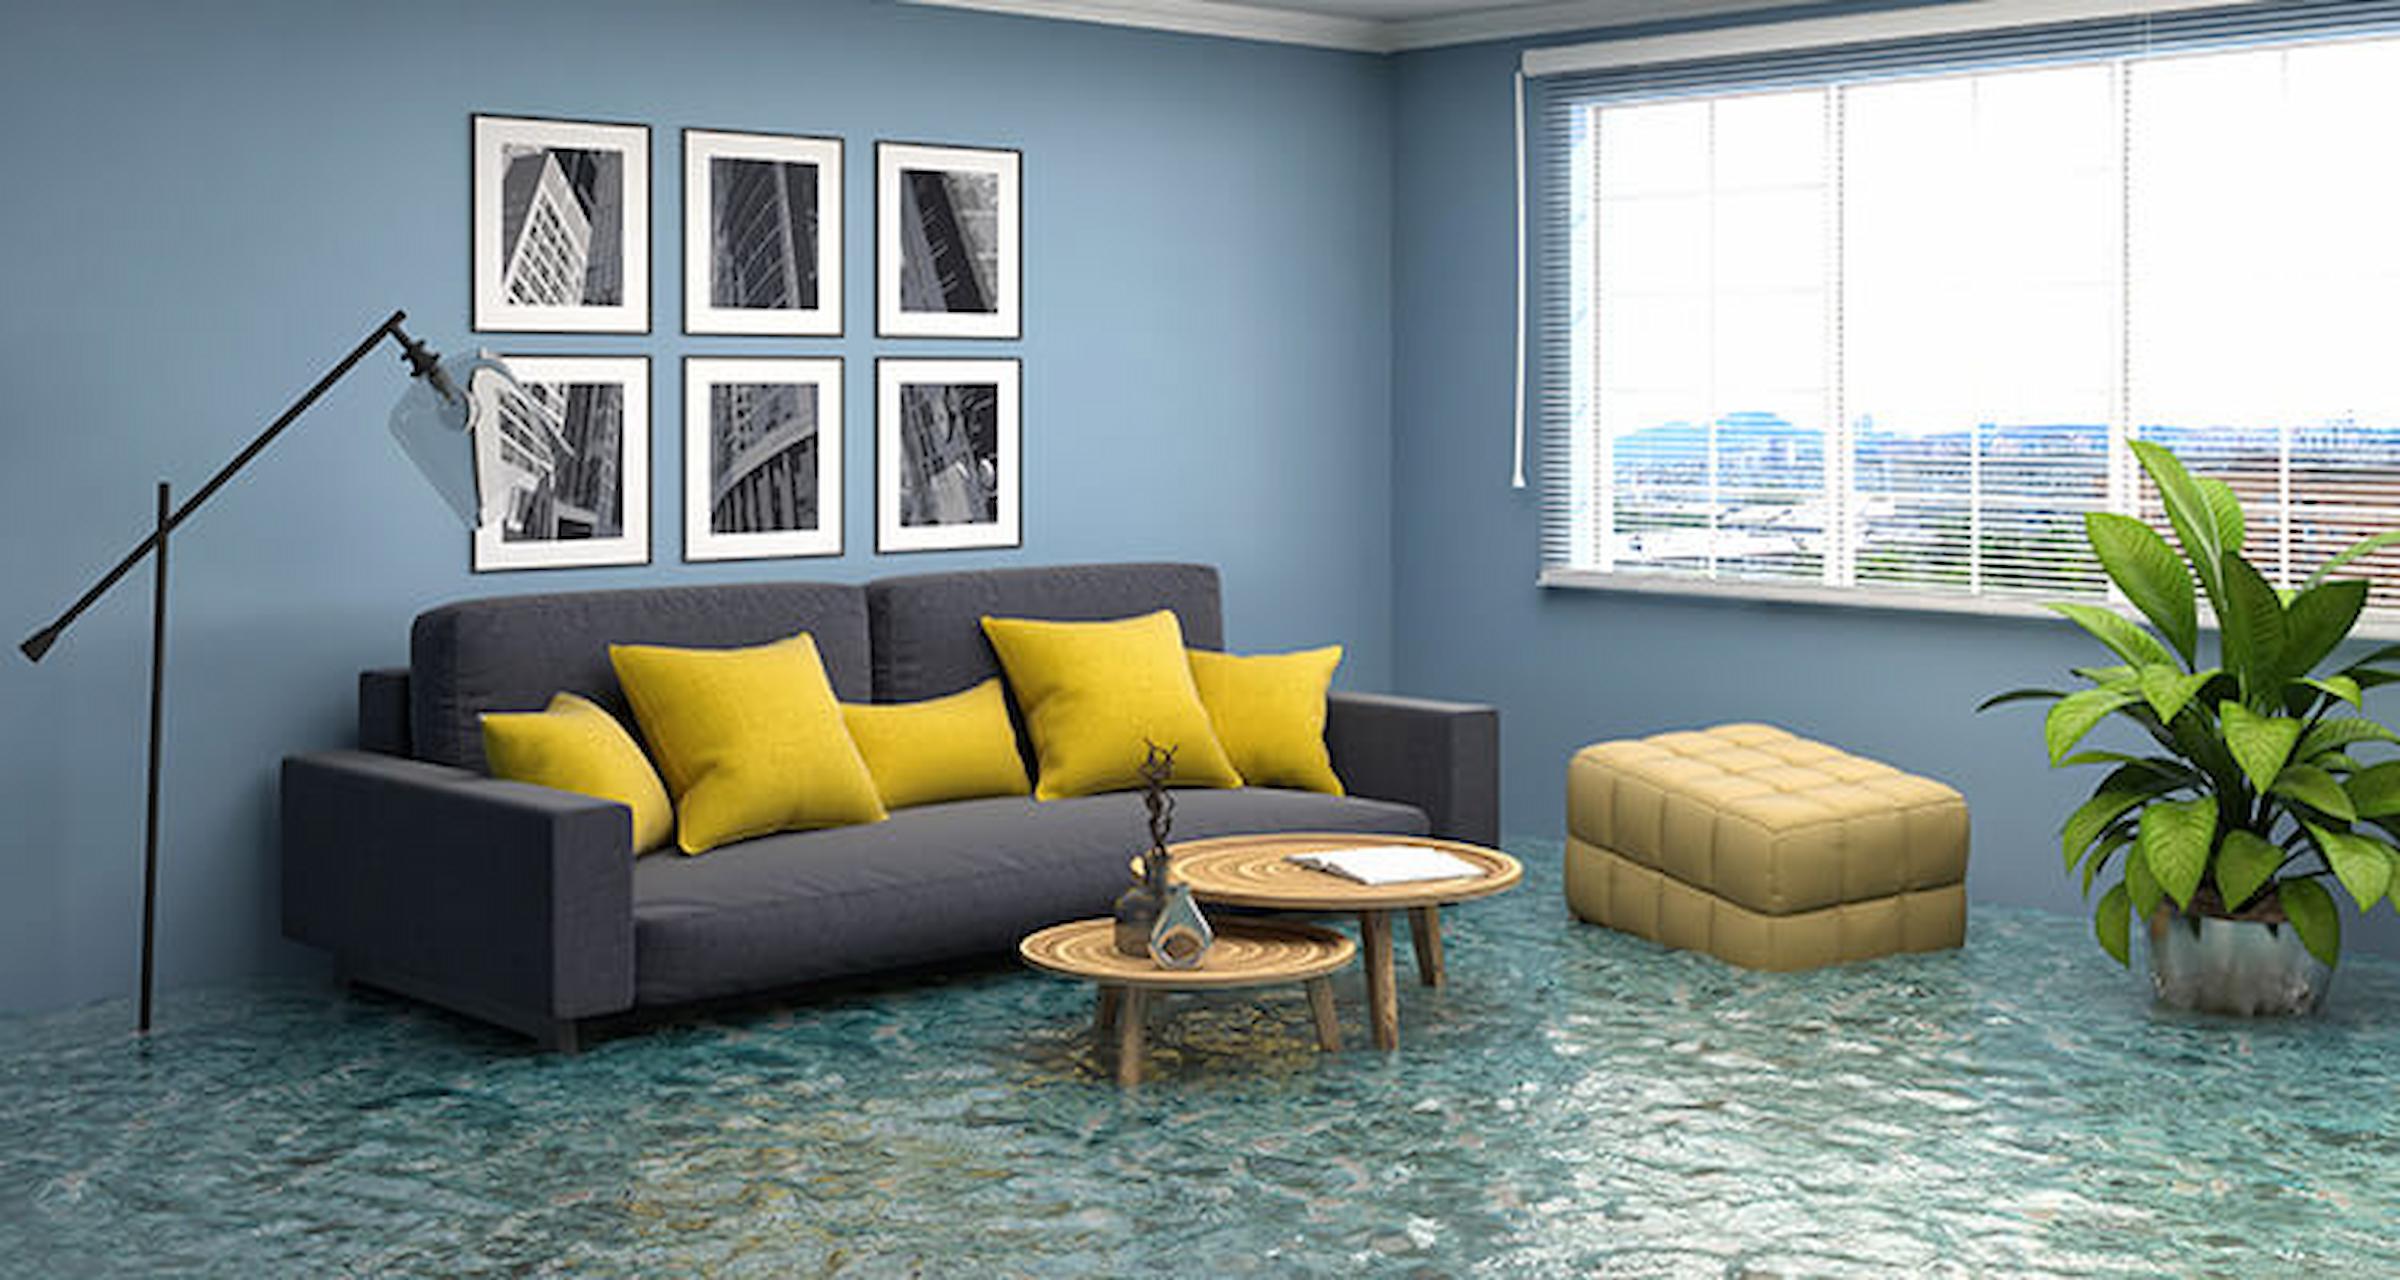 Here’s Why You Should Hire A Flood Damage Restoration Service Provider